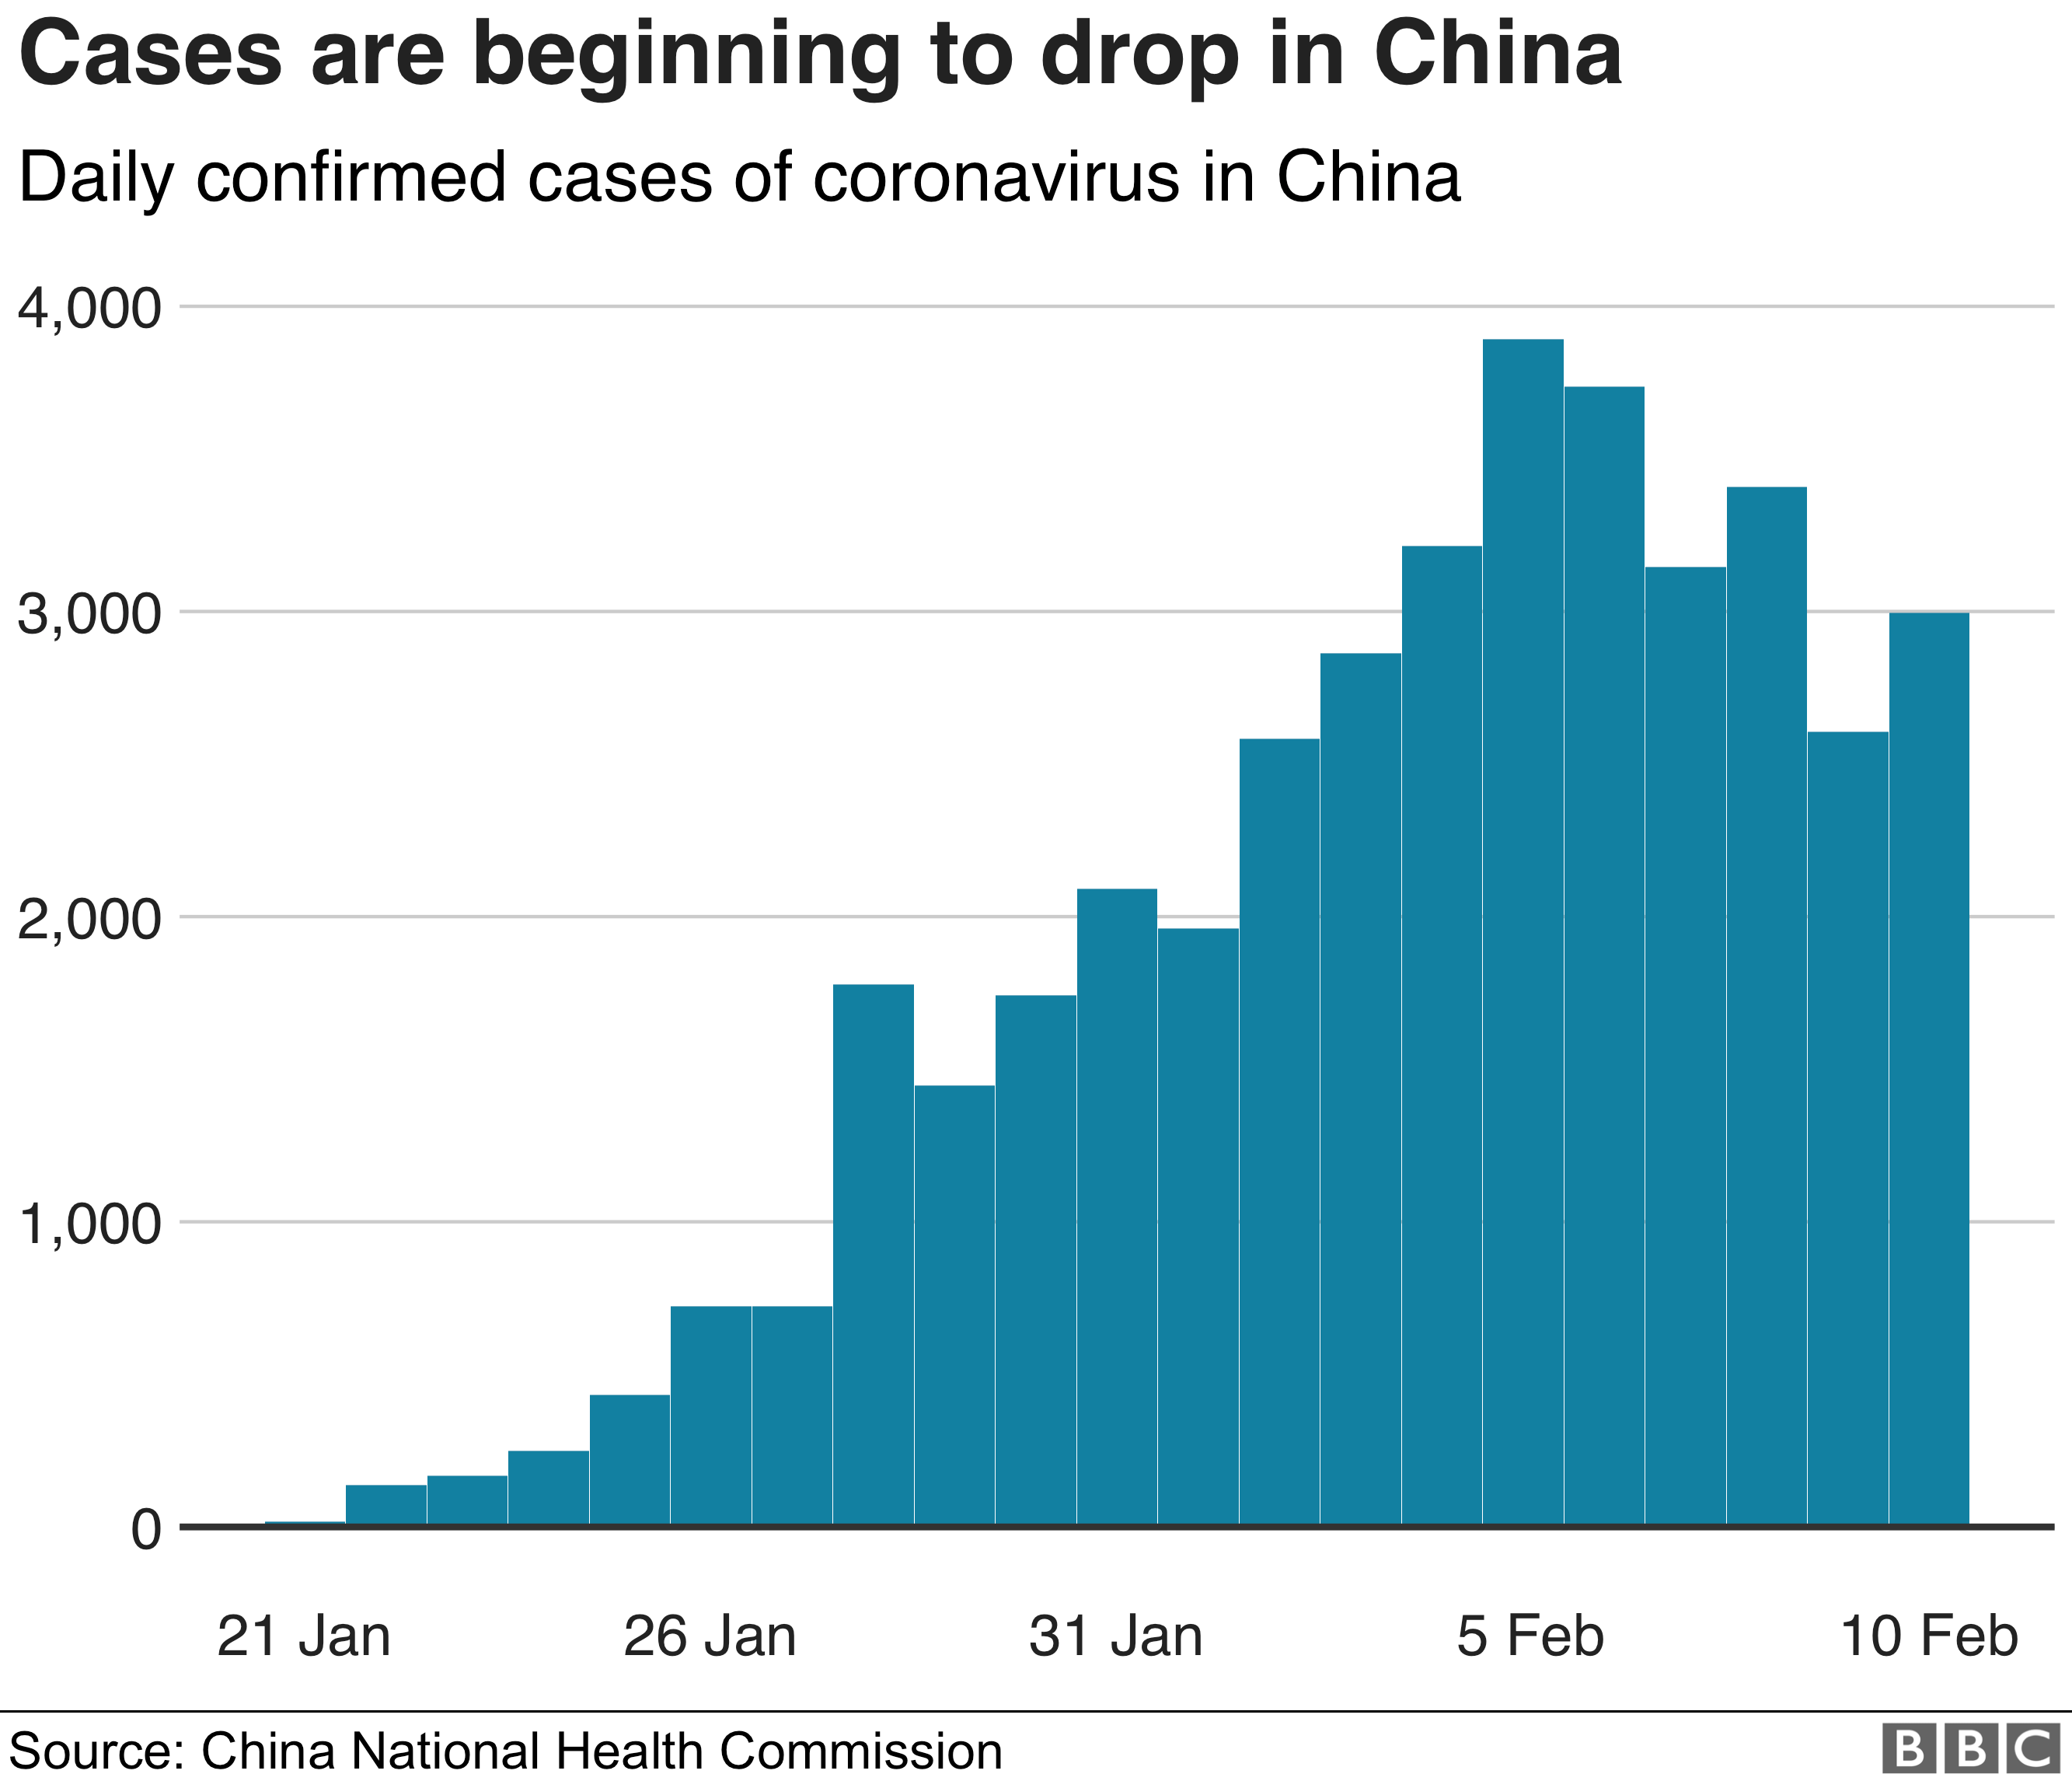 Chart showing how daily confirmed cases of coronavirus in China are beginning to drop from a peak on 5 Feb